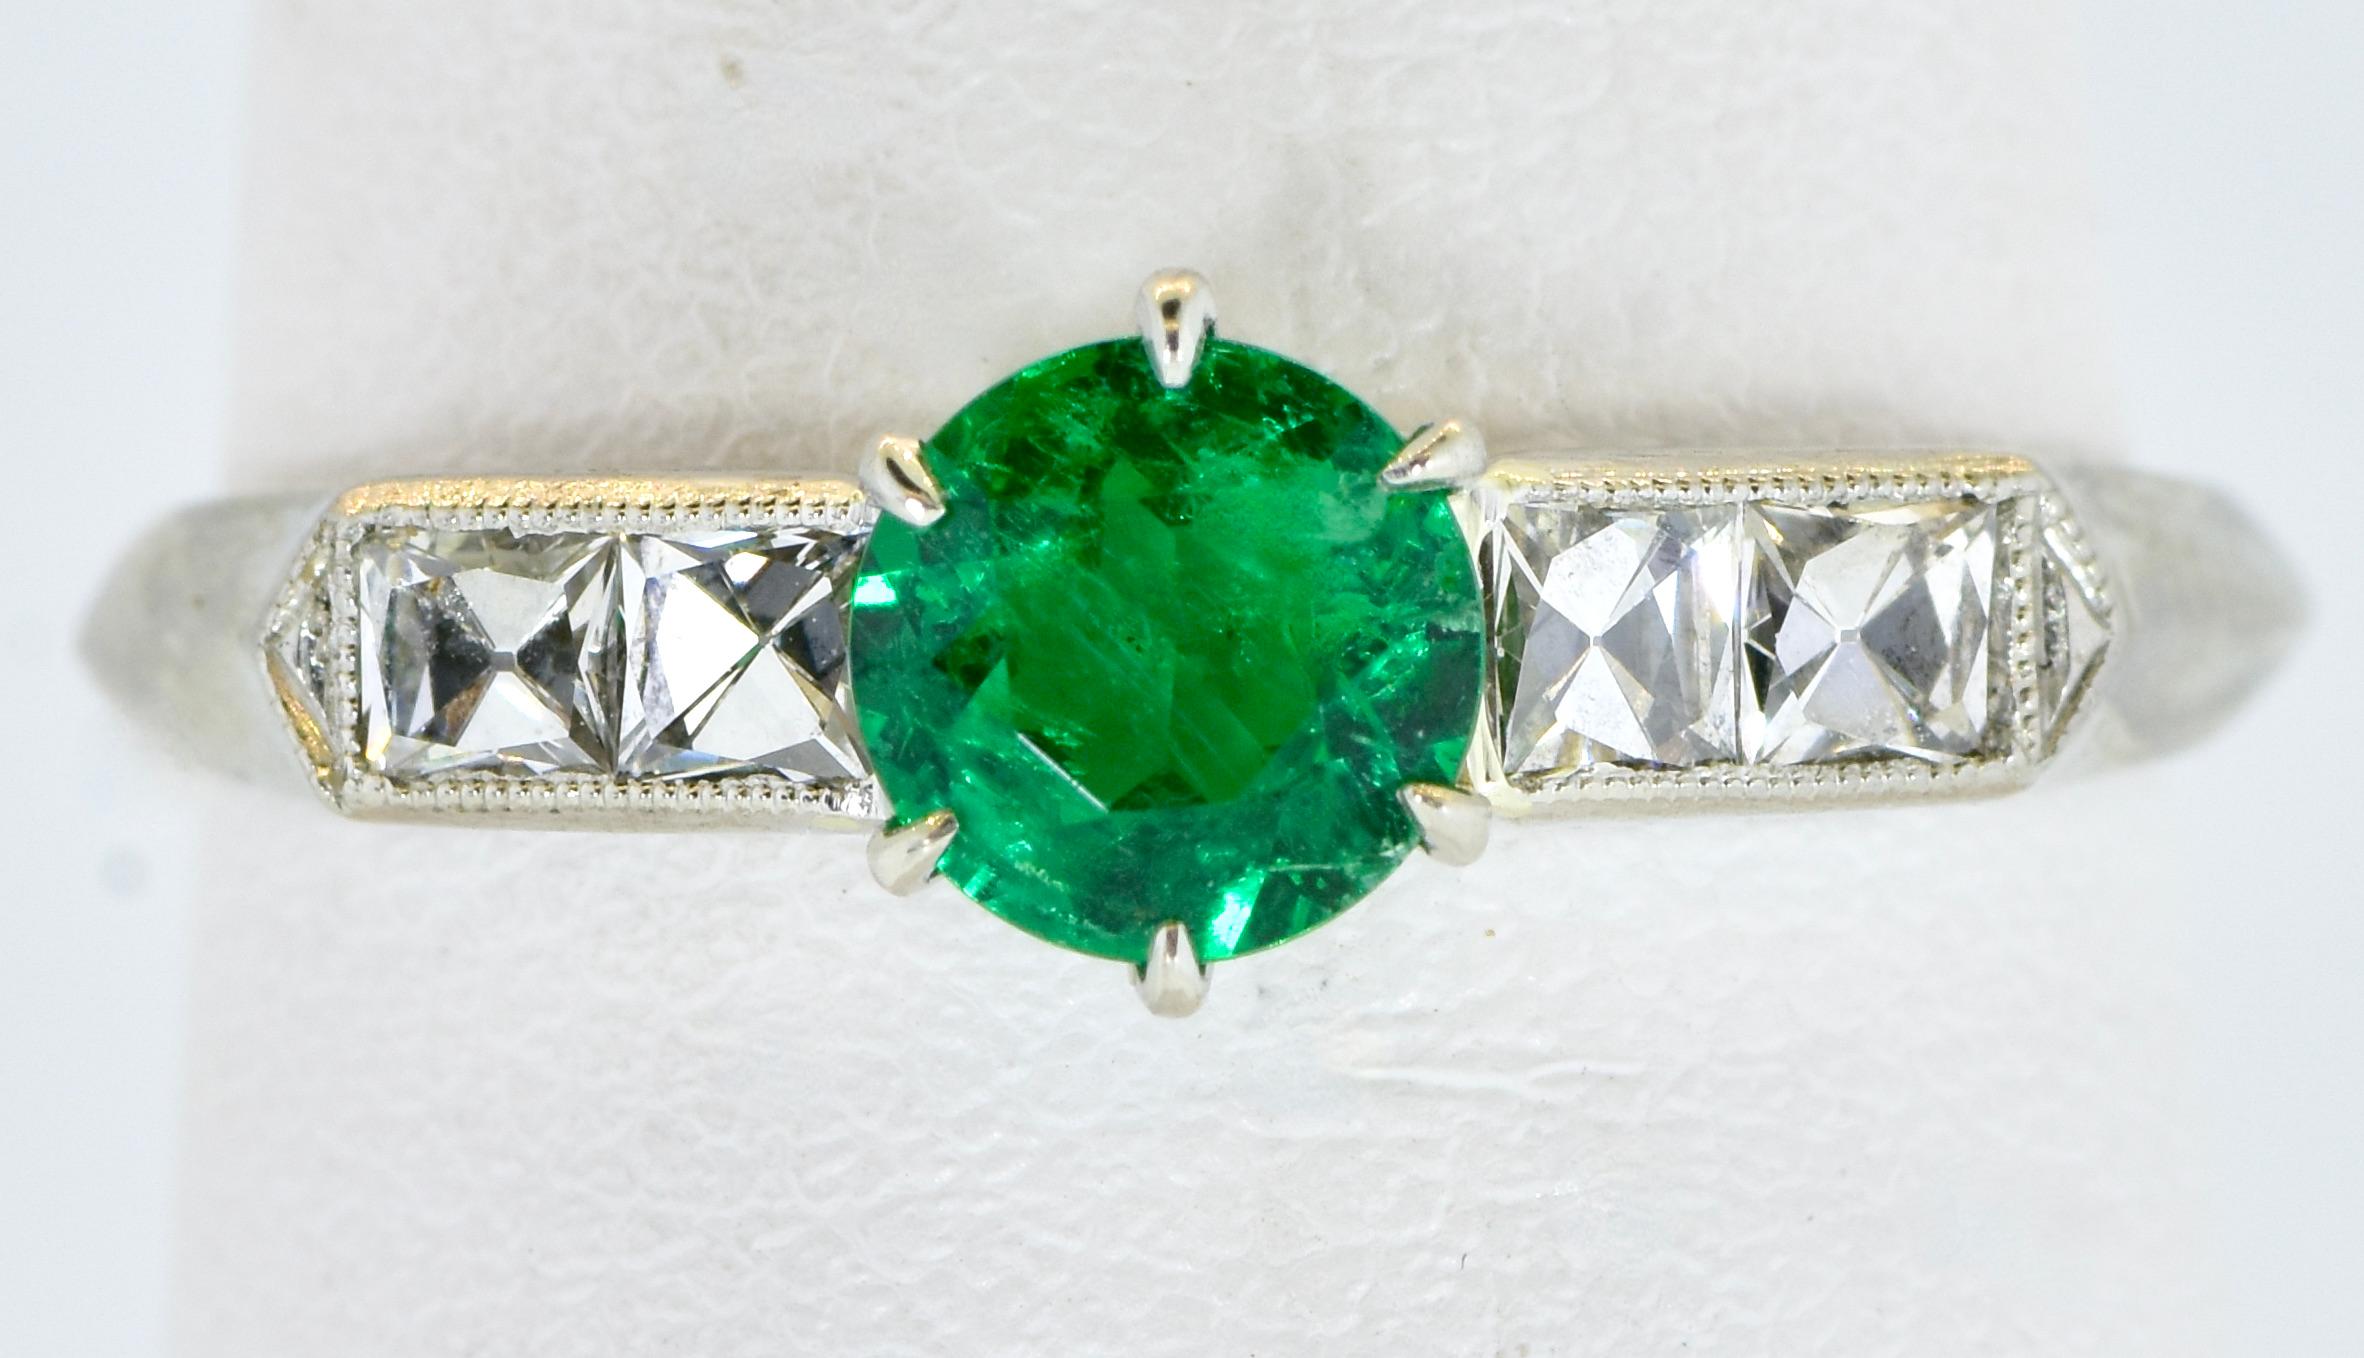 Colombian emerald, diamond and platinum antique Art Deco ring, c. 1930.  The center stone weighs an approximately .47 cts., is a very fine Colombian emerald displaying an even vivid pure green color.  The stone is bright and lively with even green